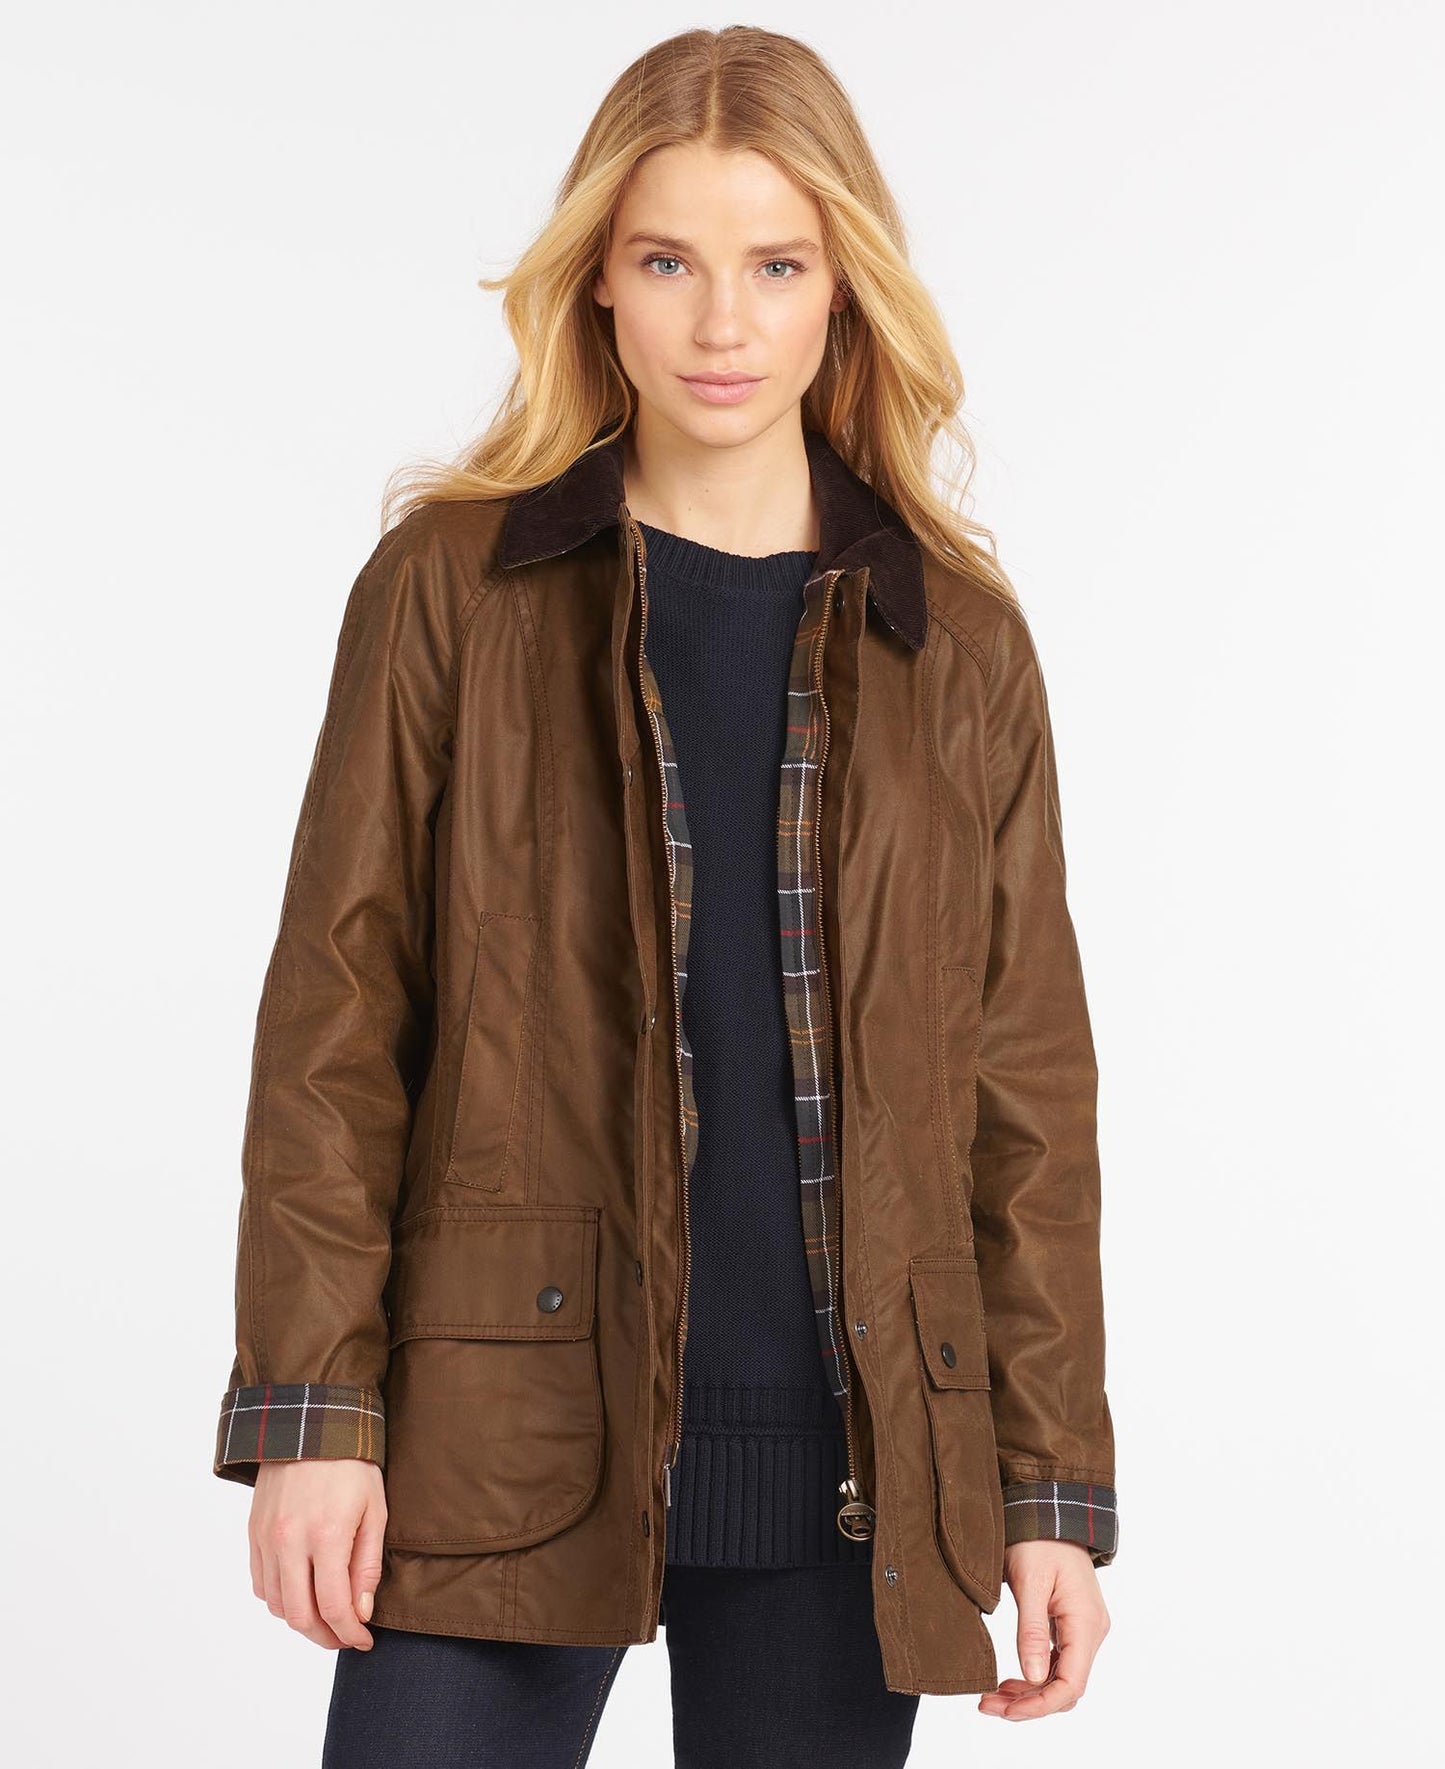 Women's Barbour Waxed Cotton Beadnell (3 Colors)